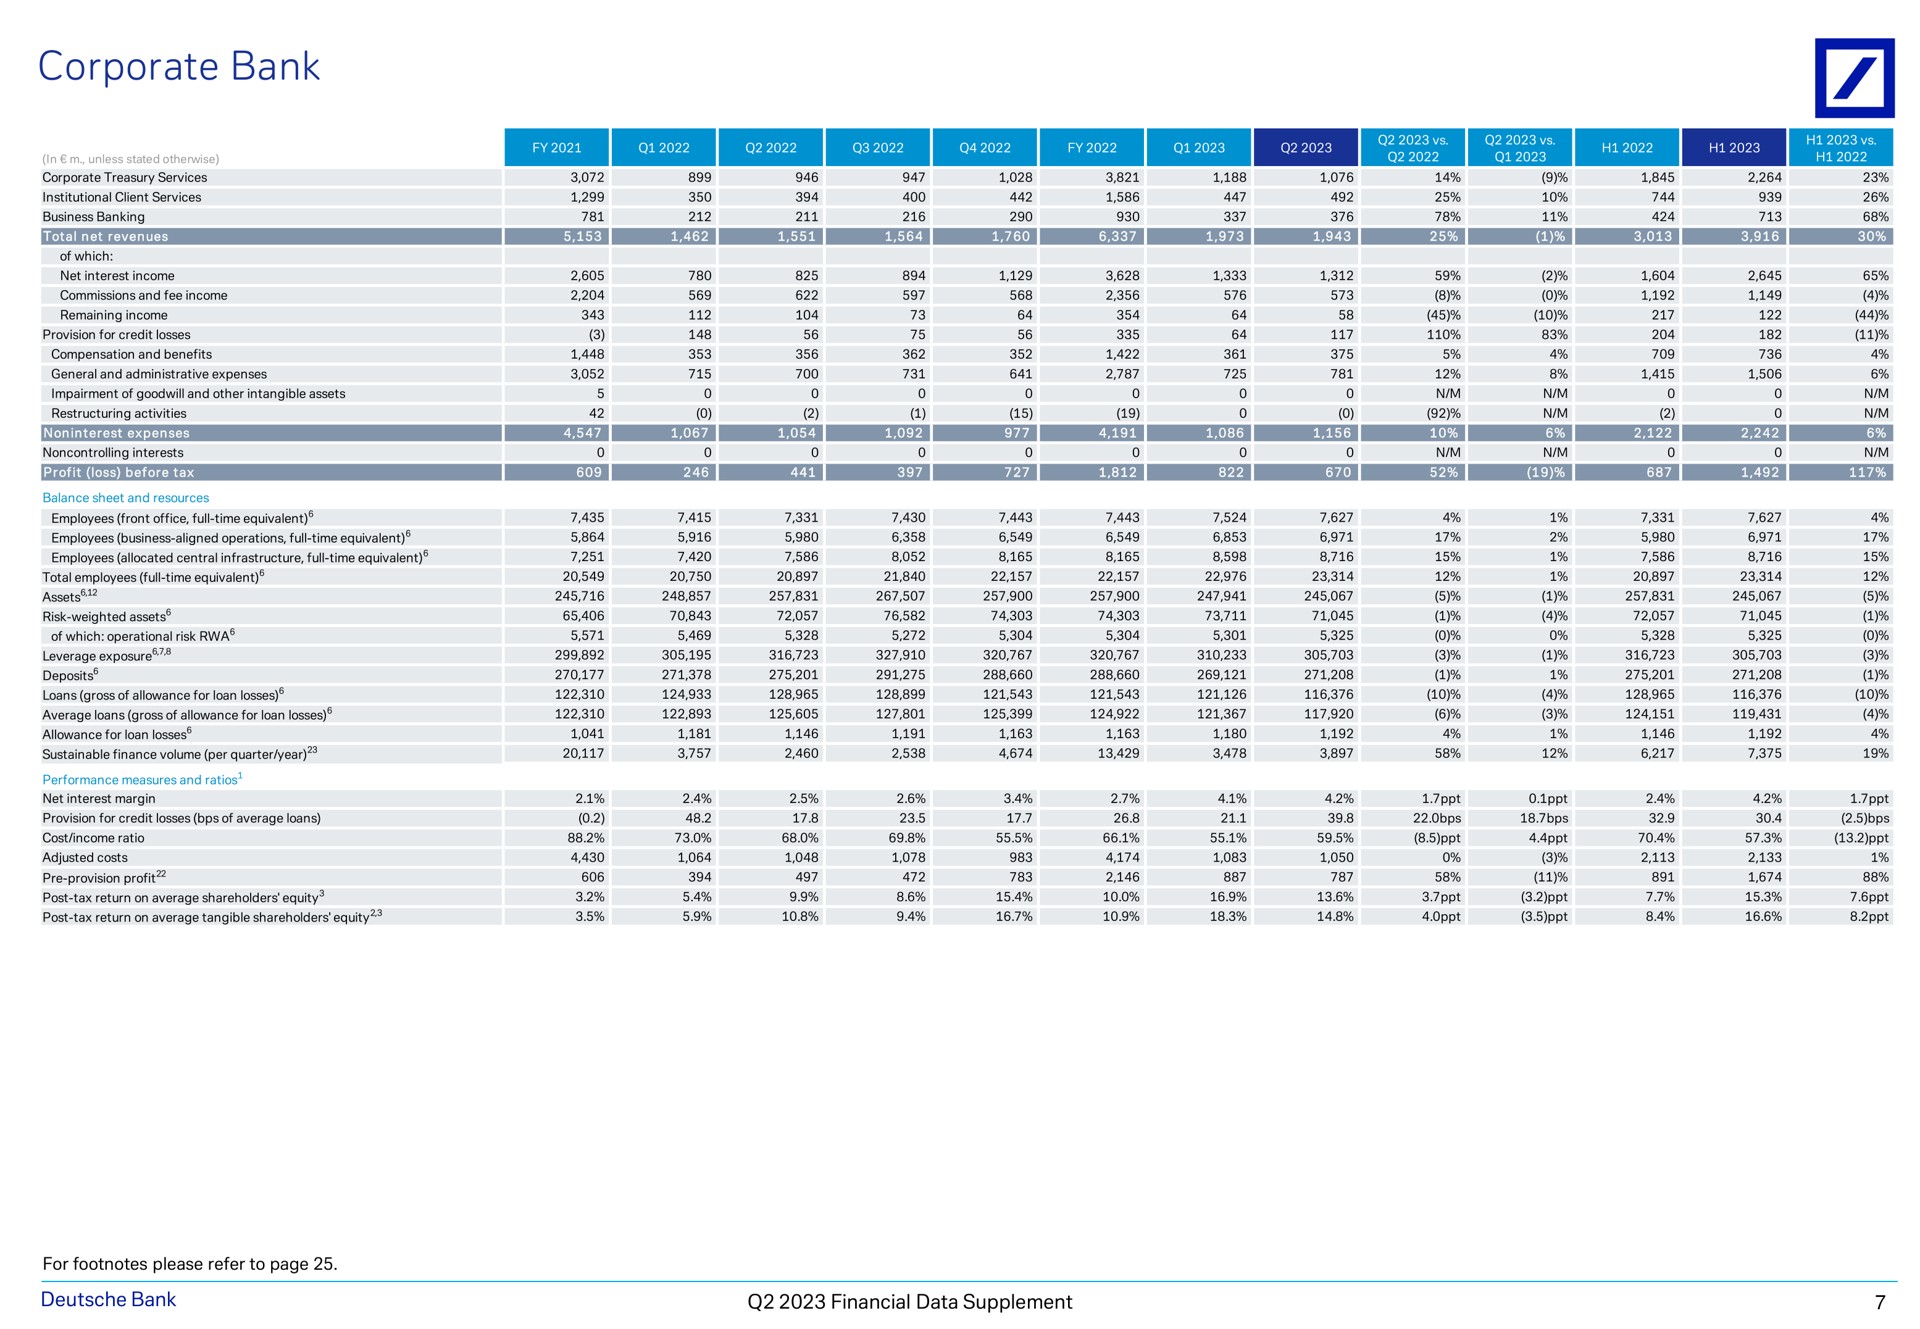 corporate bank mead in unless stated otherwise no me a a i financial data supplement | Deutsche Bank